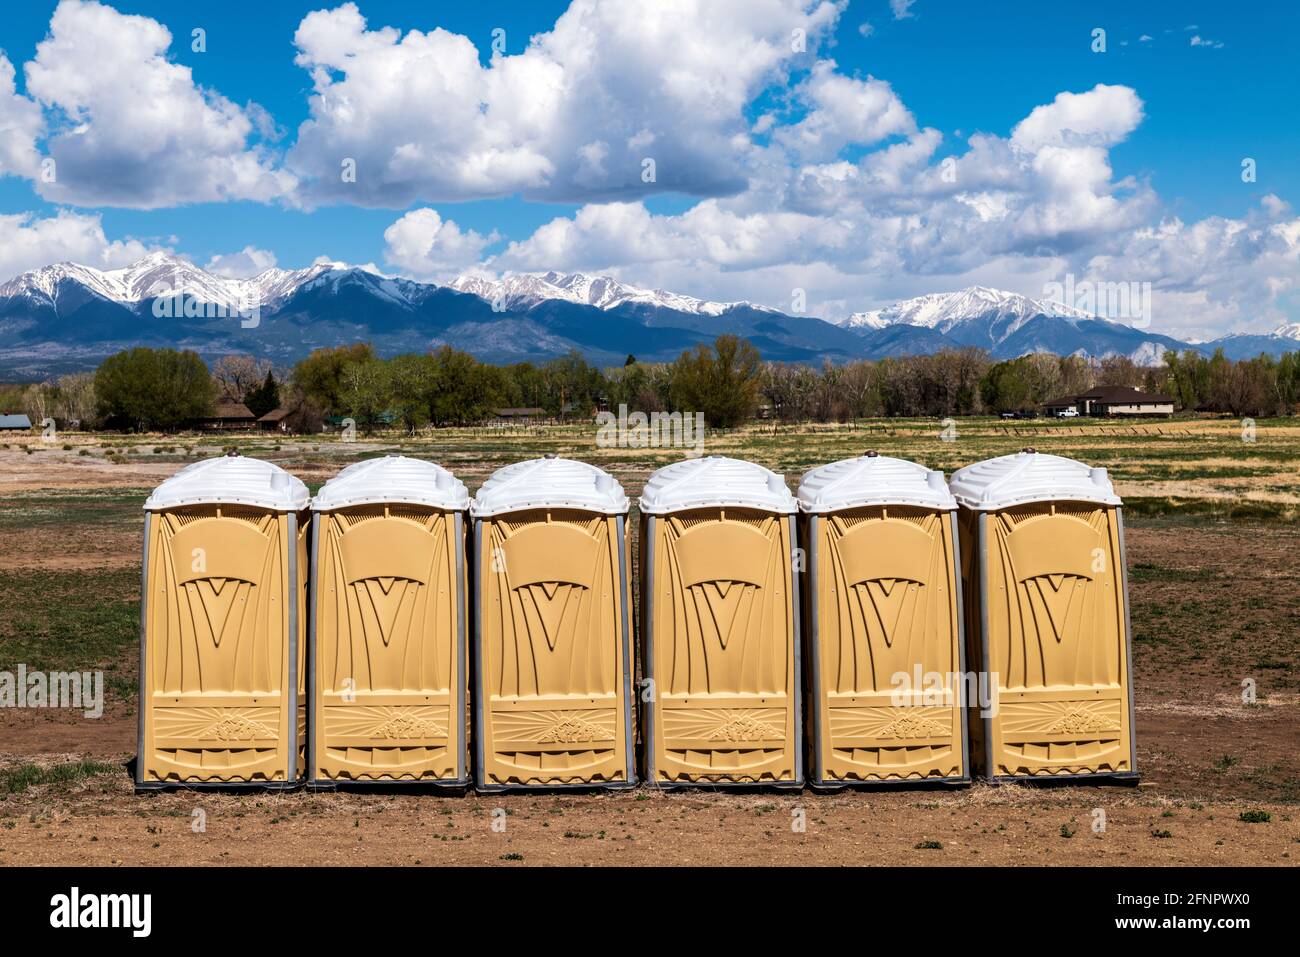 Portable toilets - potties set up on central Colorado ranch to accomodate an event Stock Photo